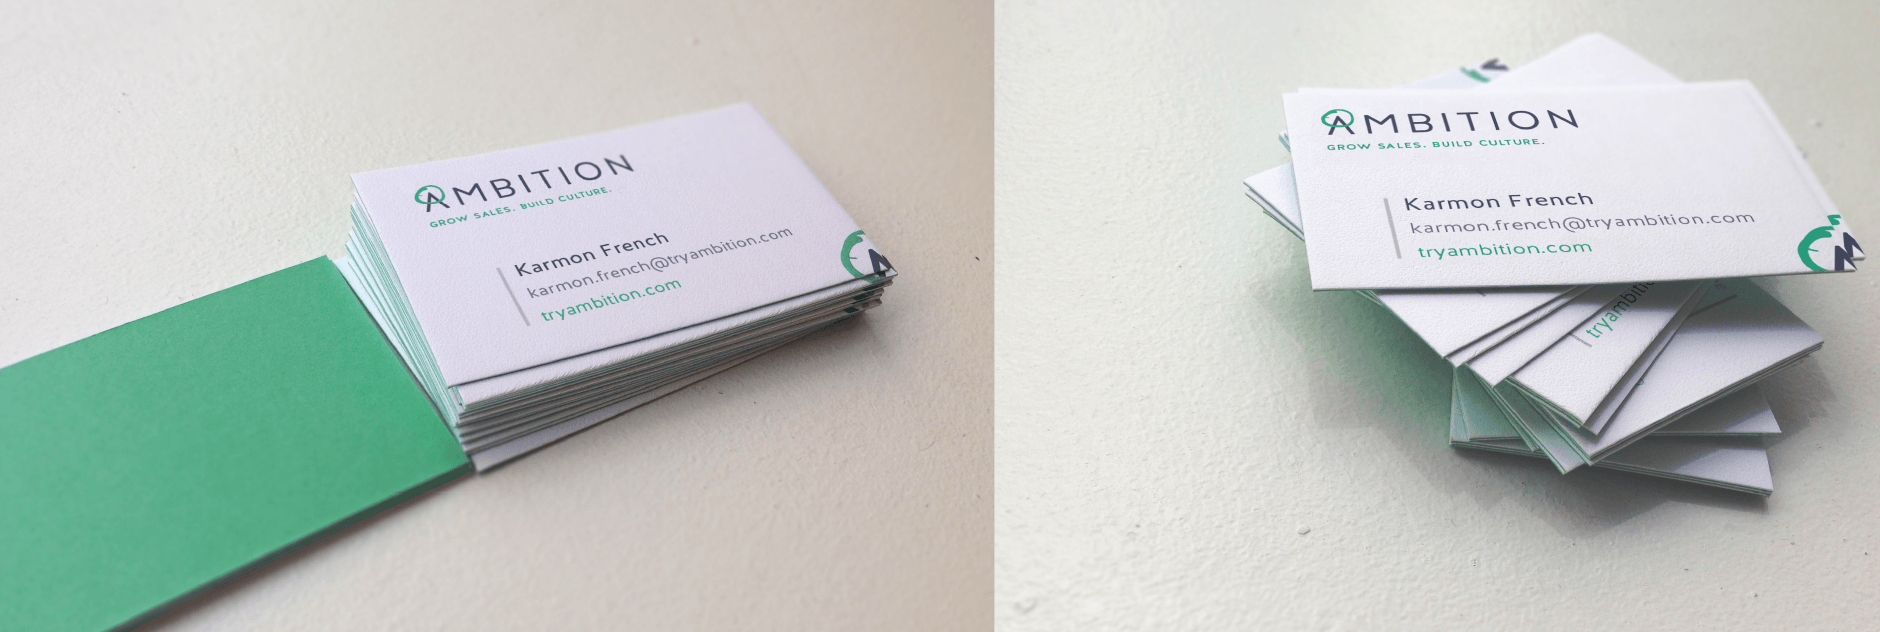 Ambition business cards